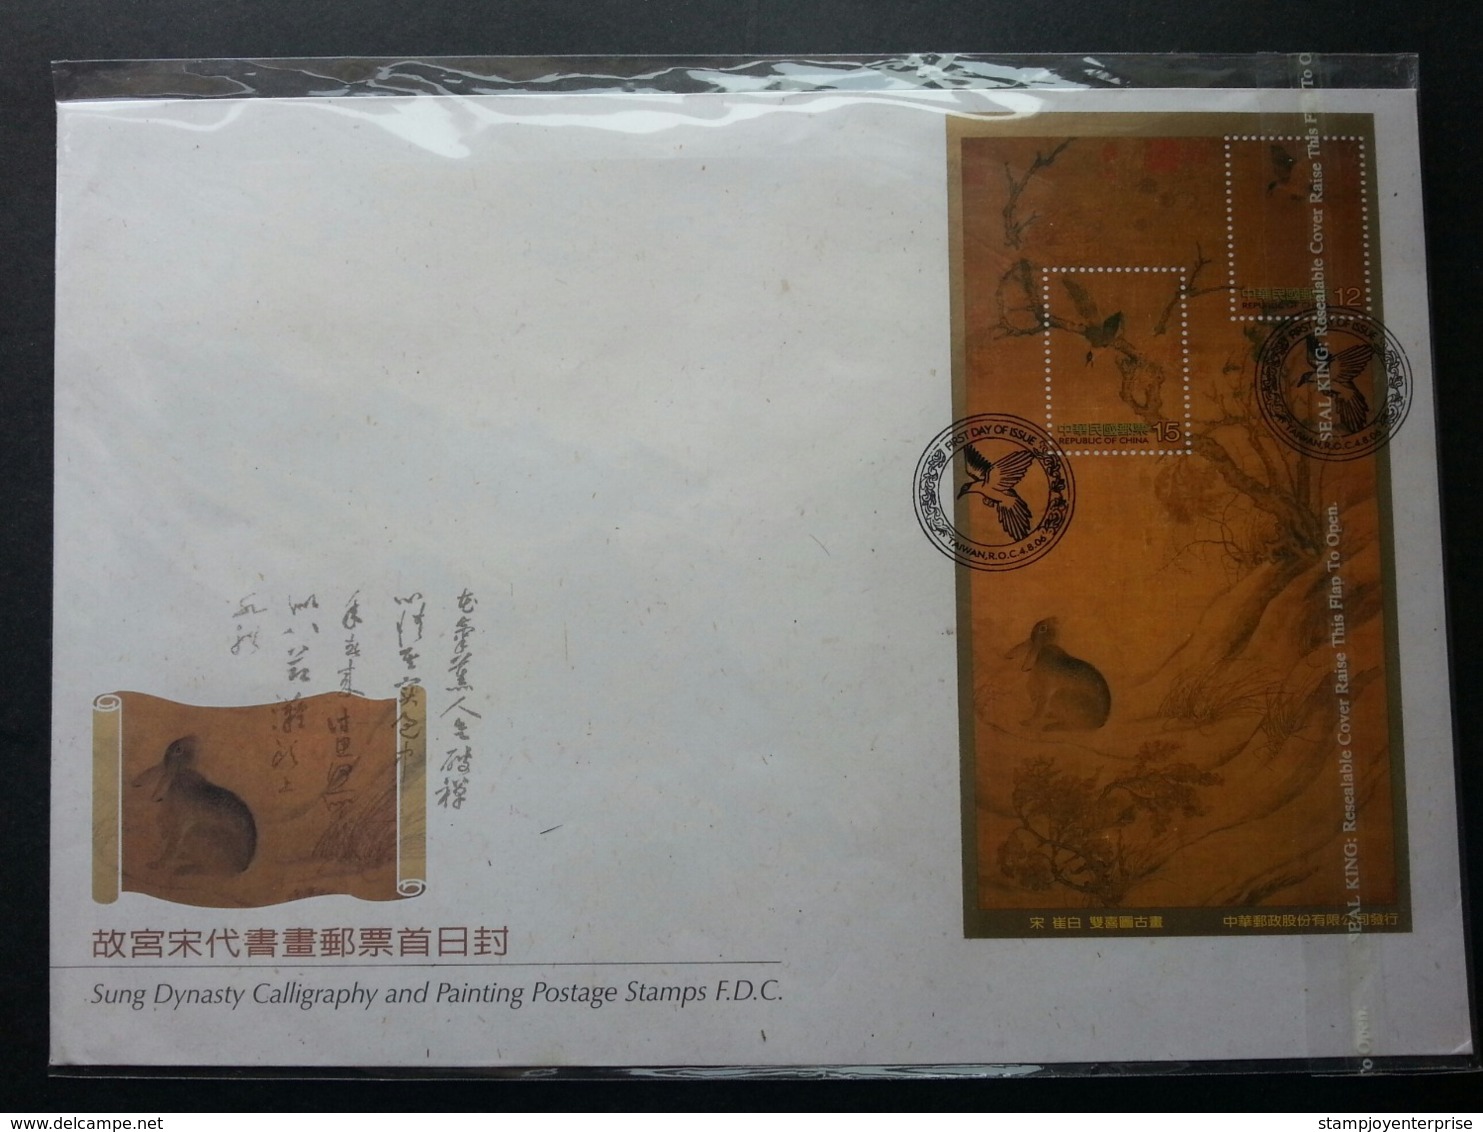 Taiwan Sung Dynasty Calligraphy & Painting 2006 Art Rabbit (FDC) - Covers & Documents